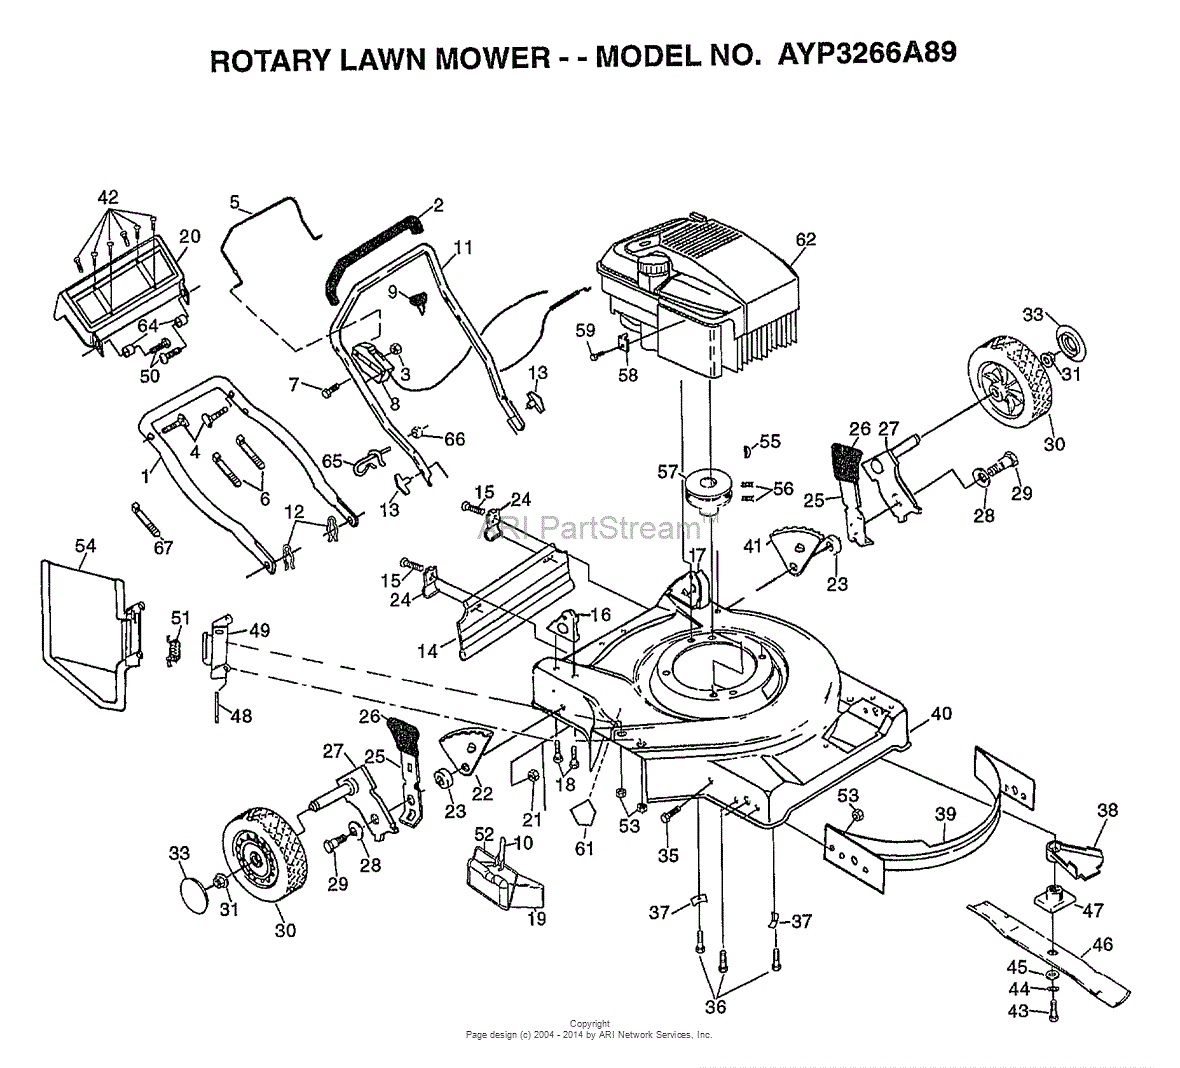 AYP/Electrolux 3266A89 (1998) Parts Diagram for ROTARY LAWN MOWER